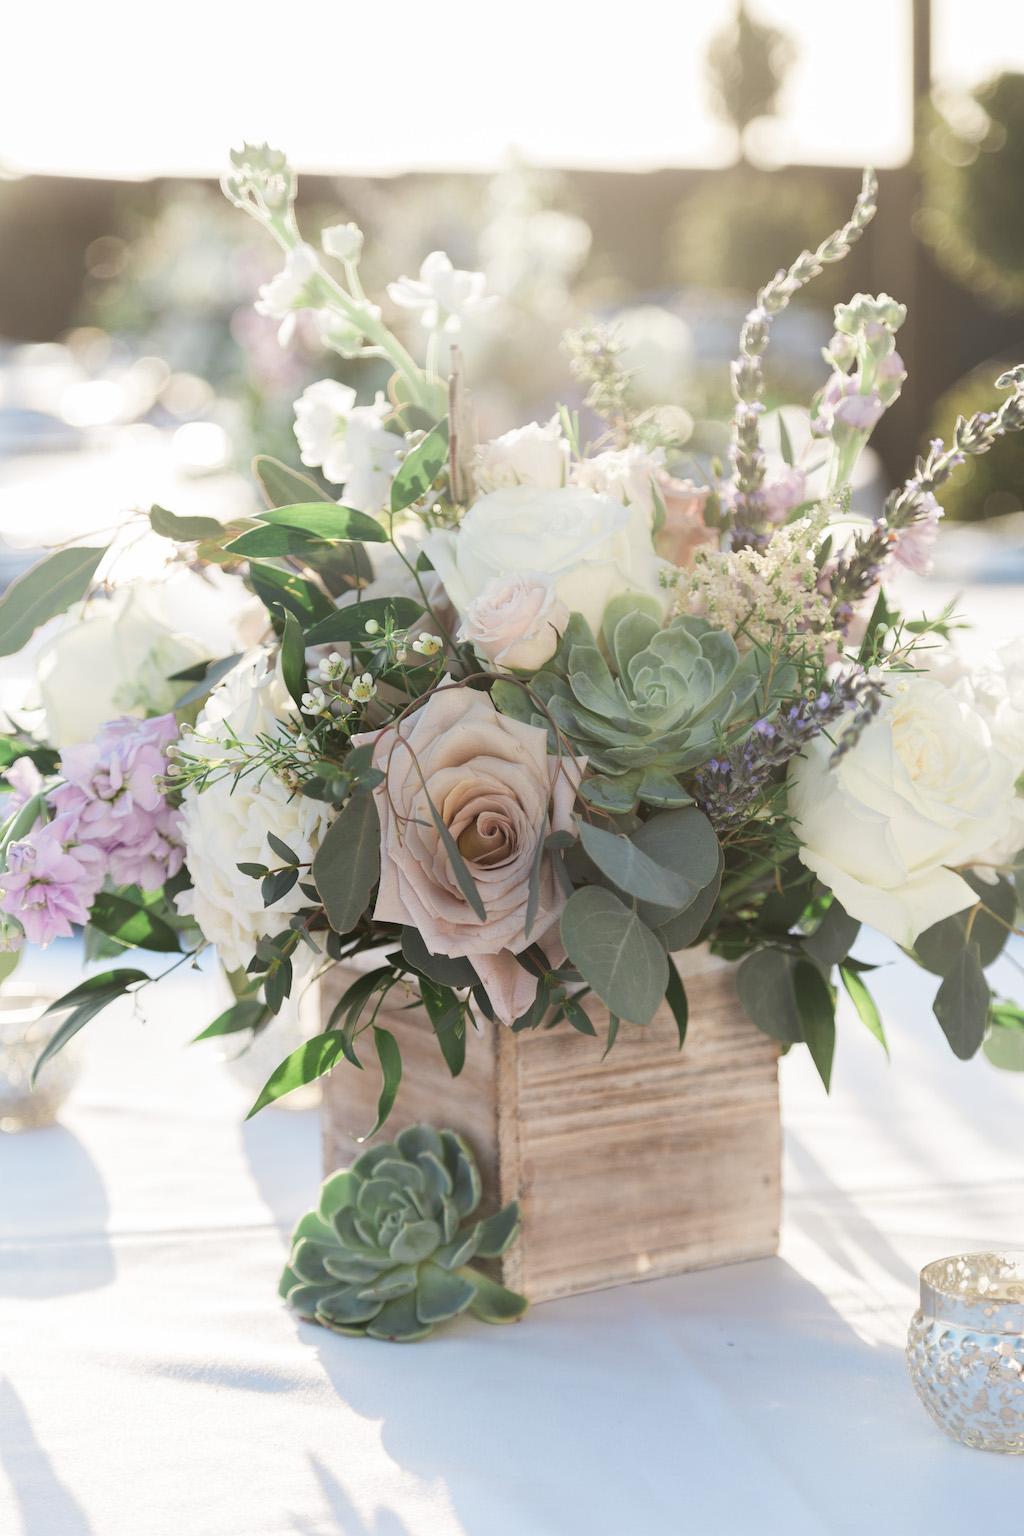 Rustic Romantic Beach Inspired Wedding Reception Decor, Wooden Planter Box with Blush Pink, White, Lilac Greenery, Eucalyptus and Succulents Floral Centerpiece